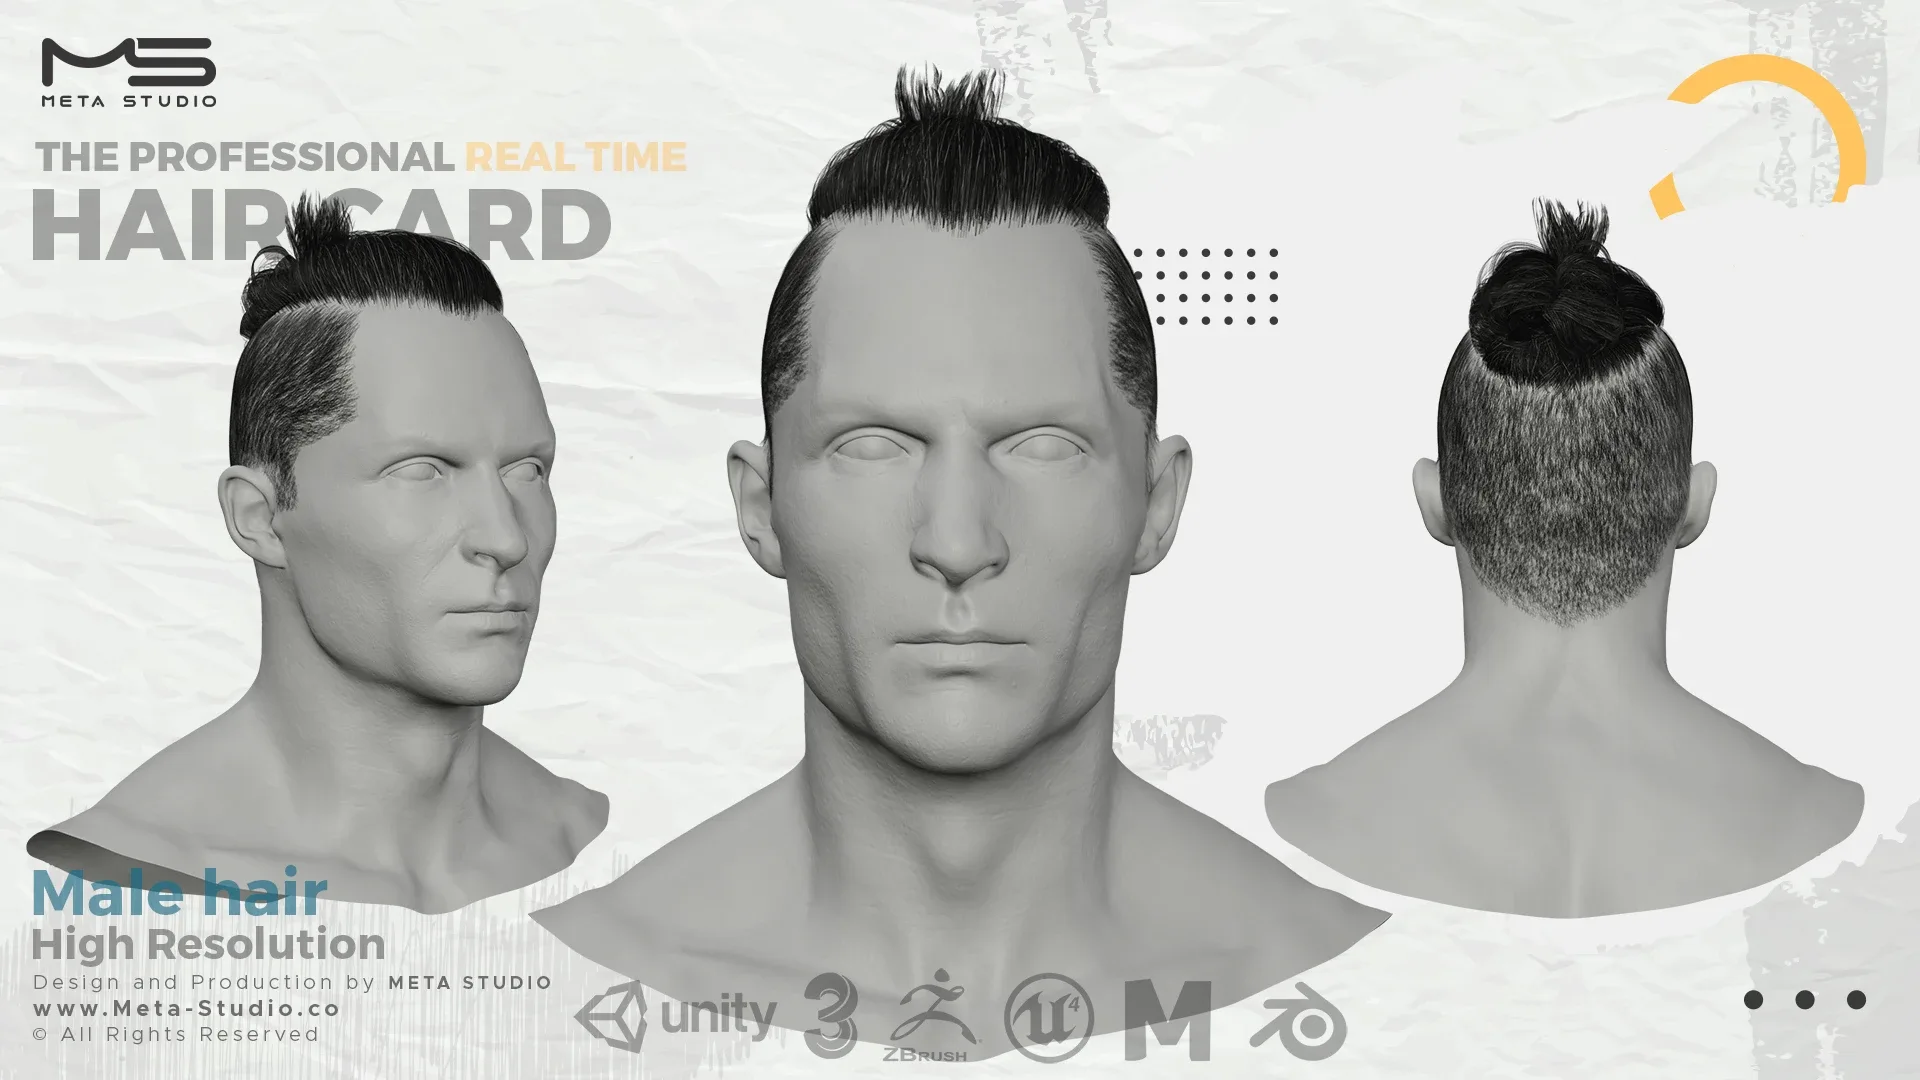 Male Hair Part 5 - Professional Realtime Hair card